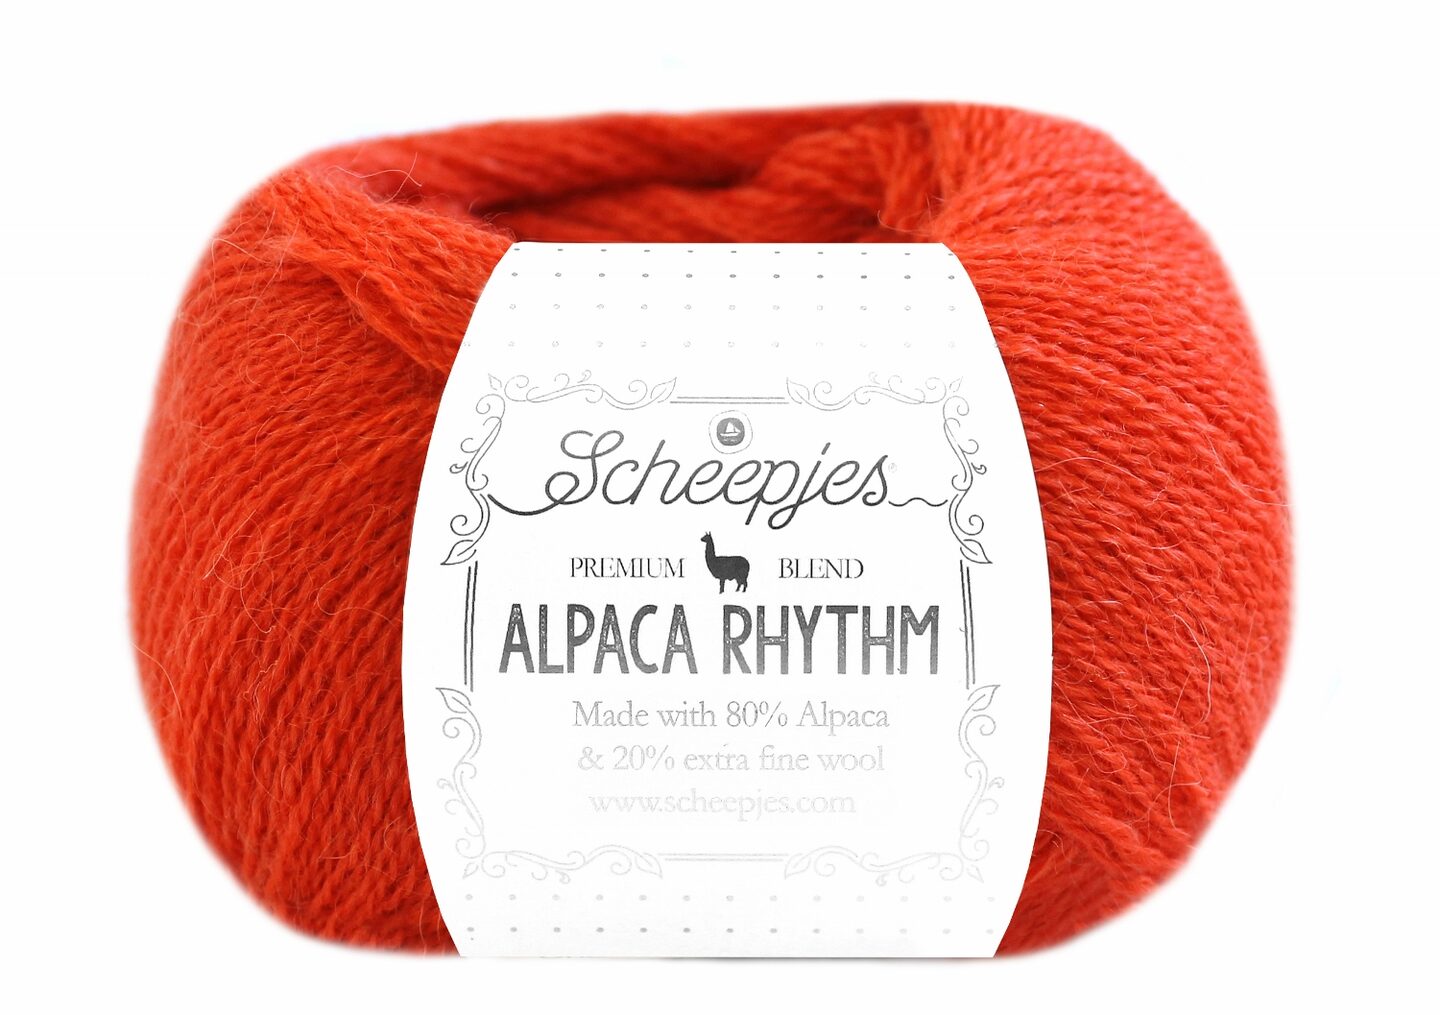 In The Rhythm of the Yarn: Mohair and Alpaca Line by Scheepjes